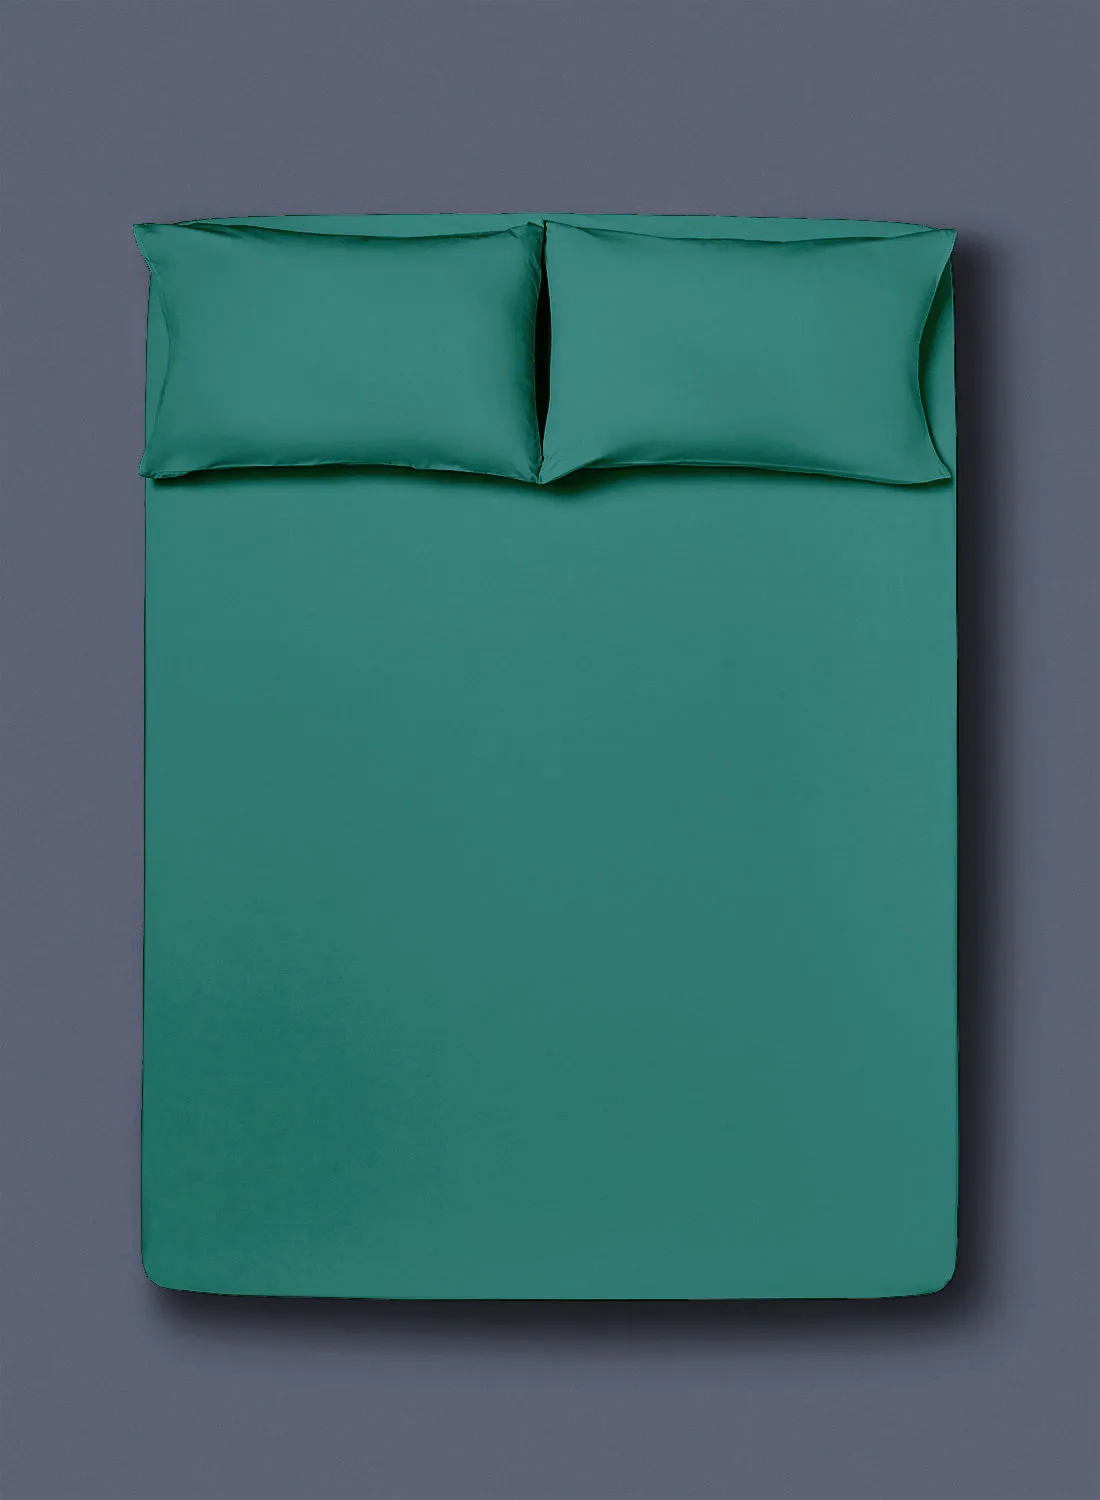 Amal Fitted Bedsheet Set King Size  100% Cotton High Quality Light Weight Everyday Use 180 TC 1 Bed Sheet And 2 Pillow Cases Emerald Green Color